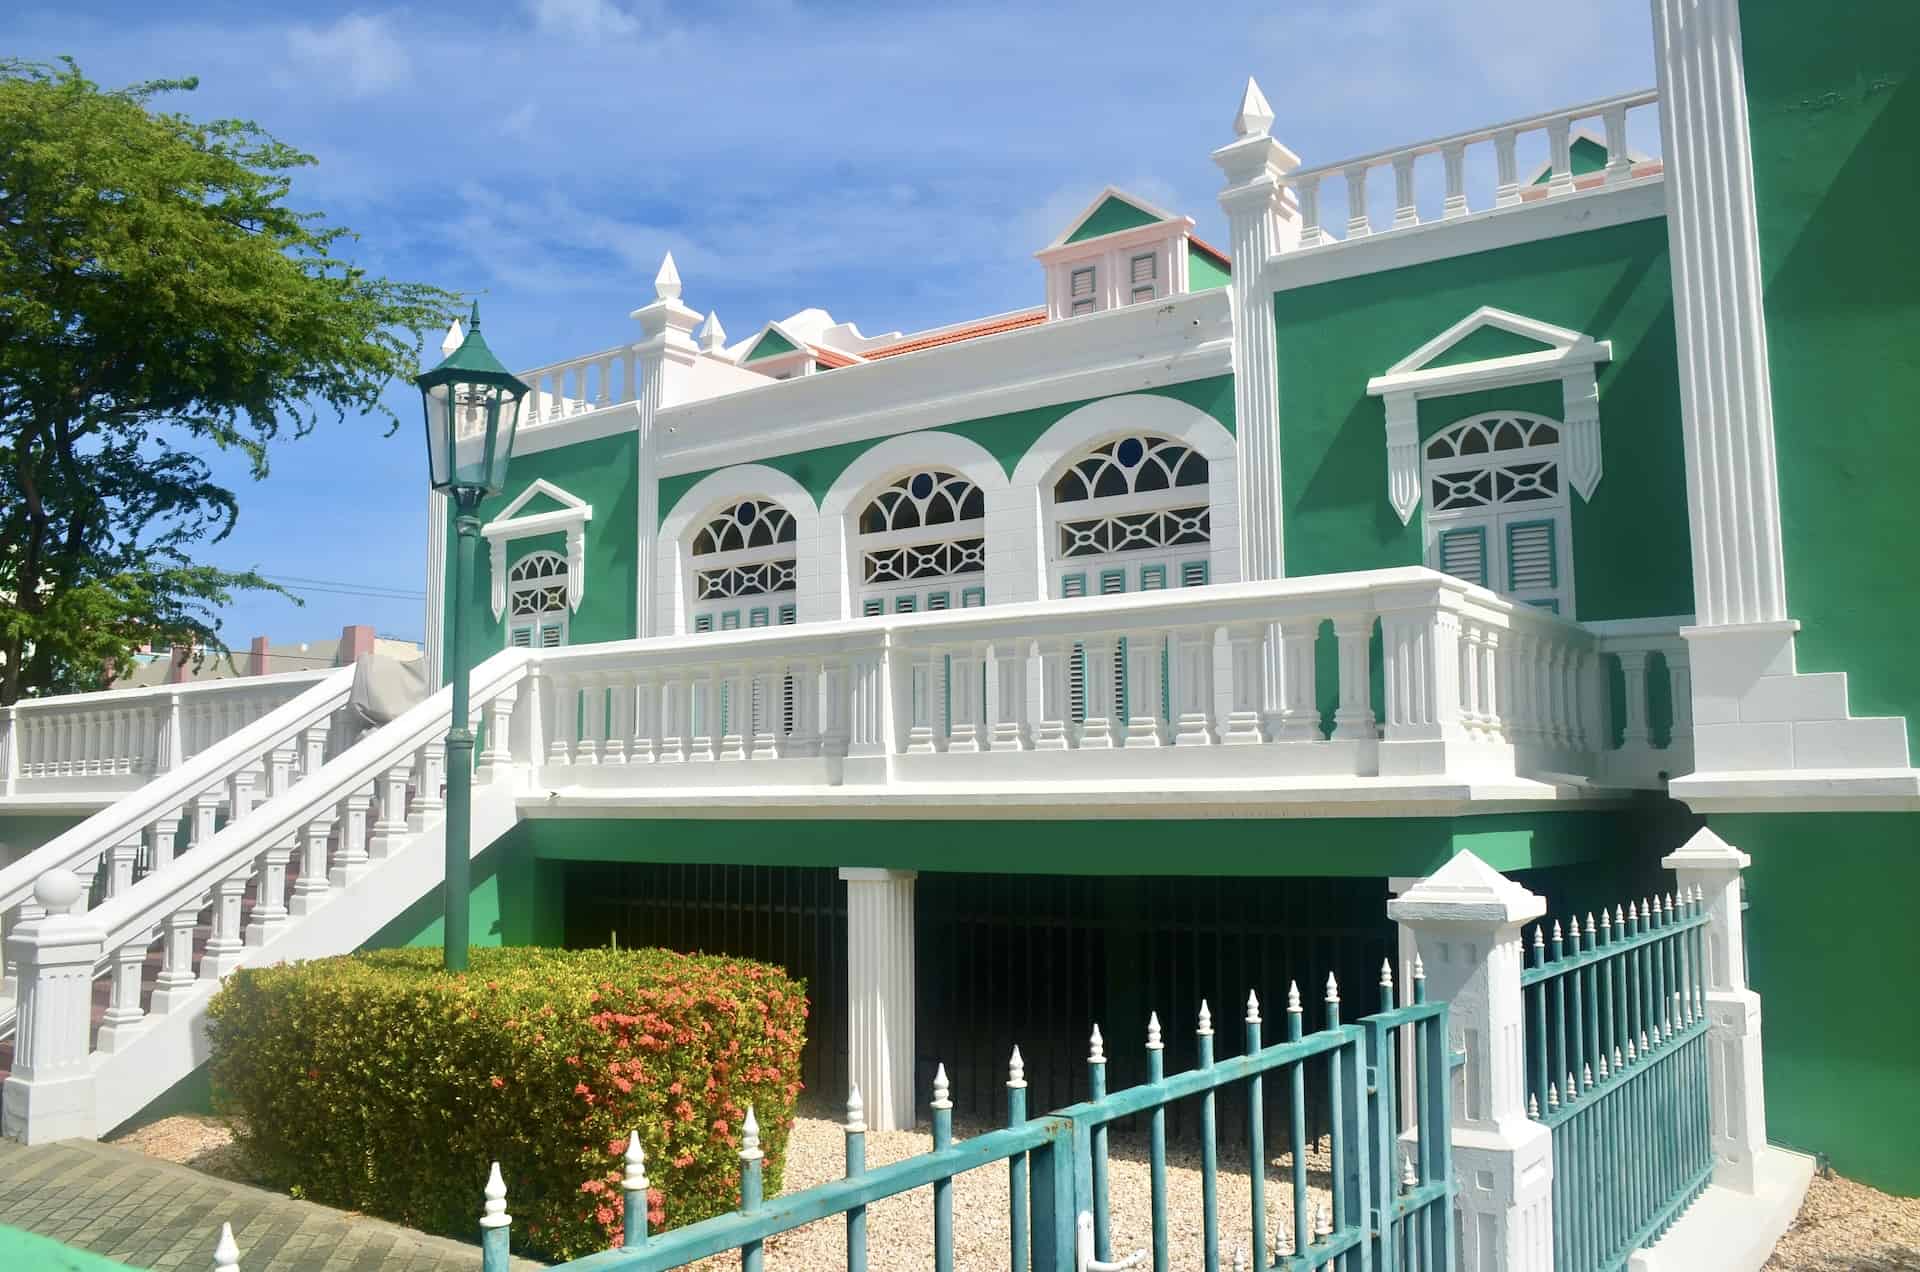 City Hall / Dr. Eloy Arends House in Oranjestad, Aruba